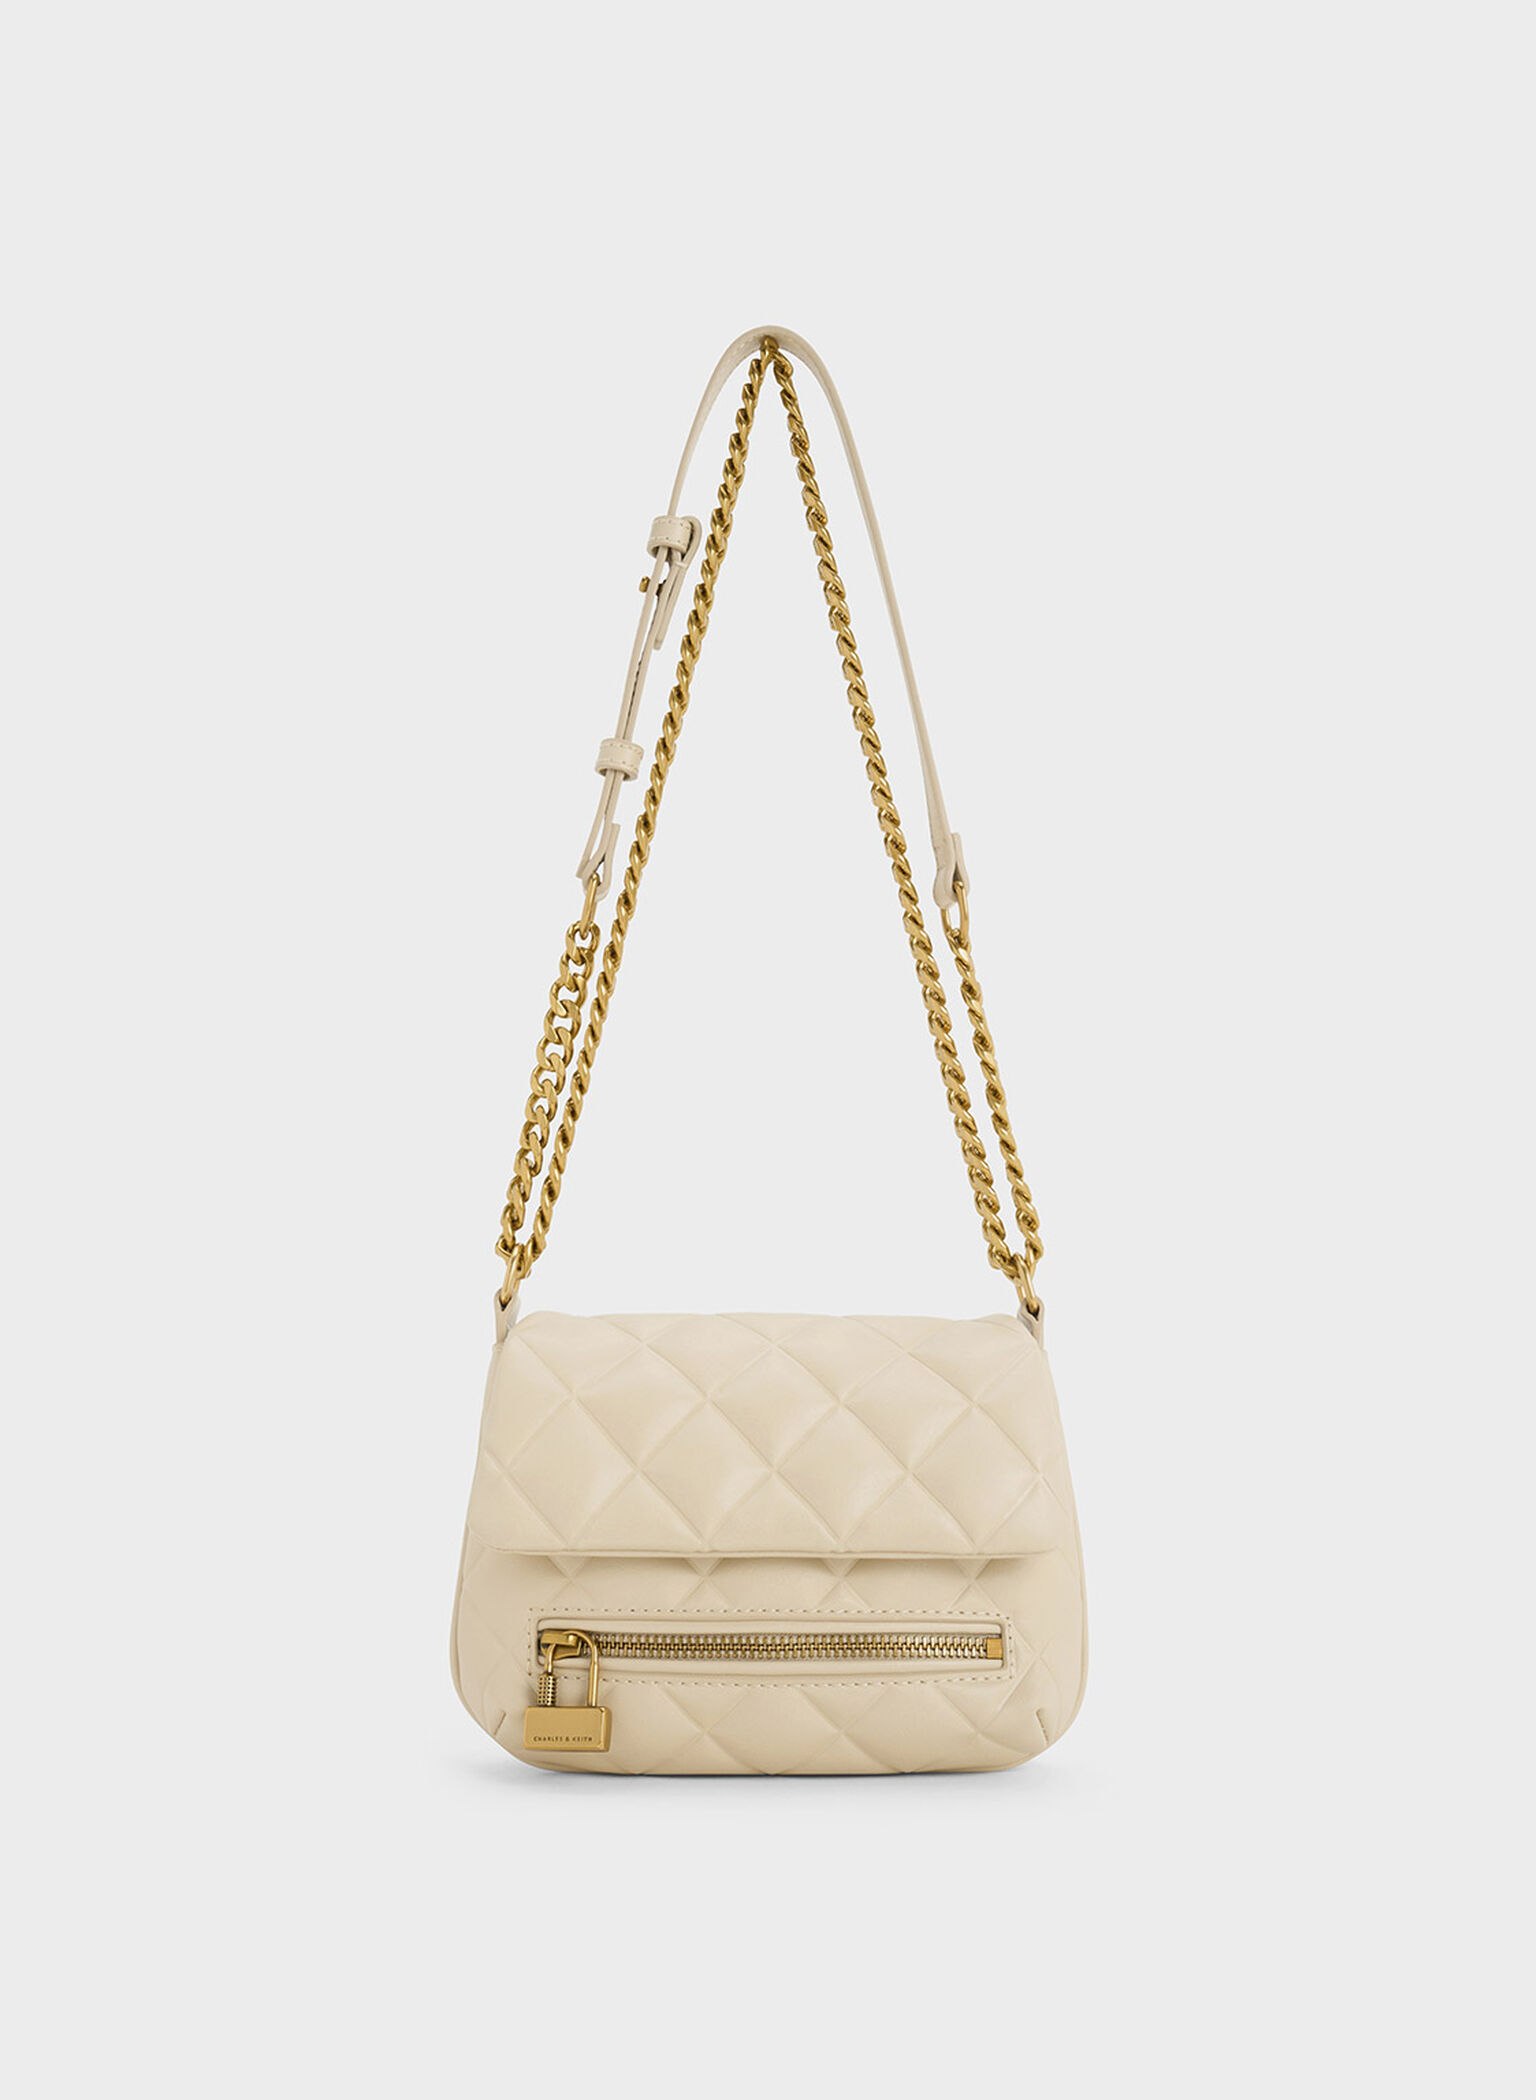 White Soft Leather Chain Shoulder Crossbody Bag Gold Chain Purse